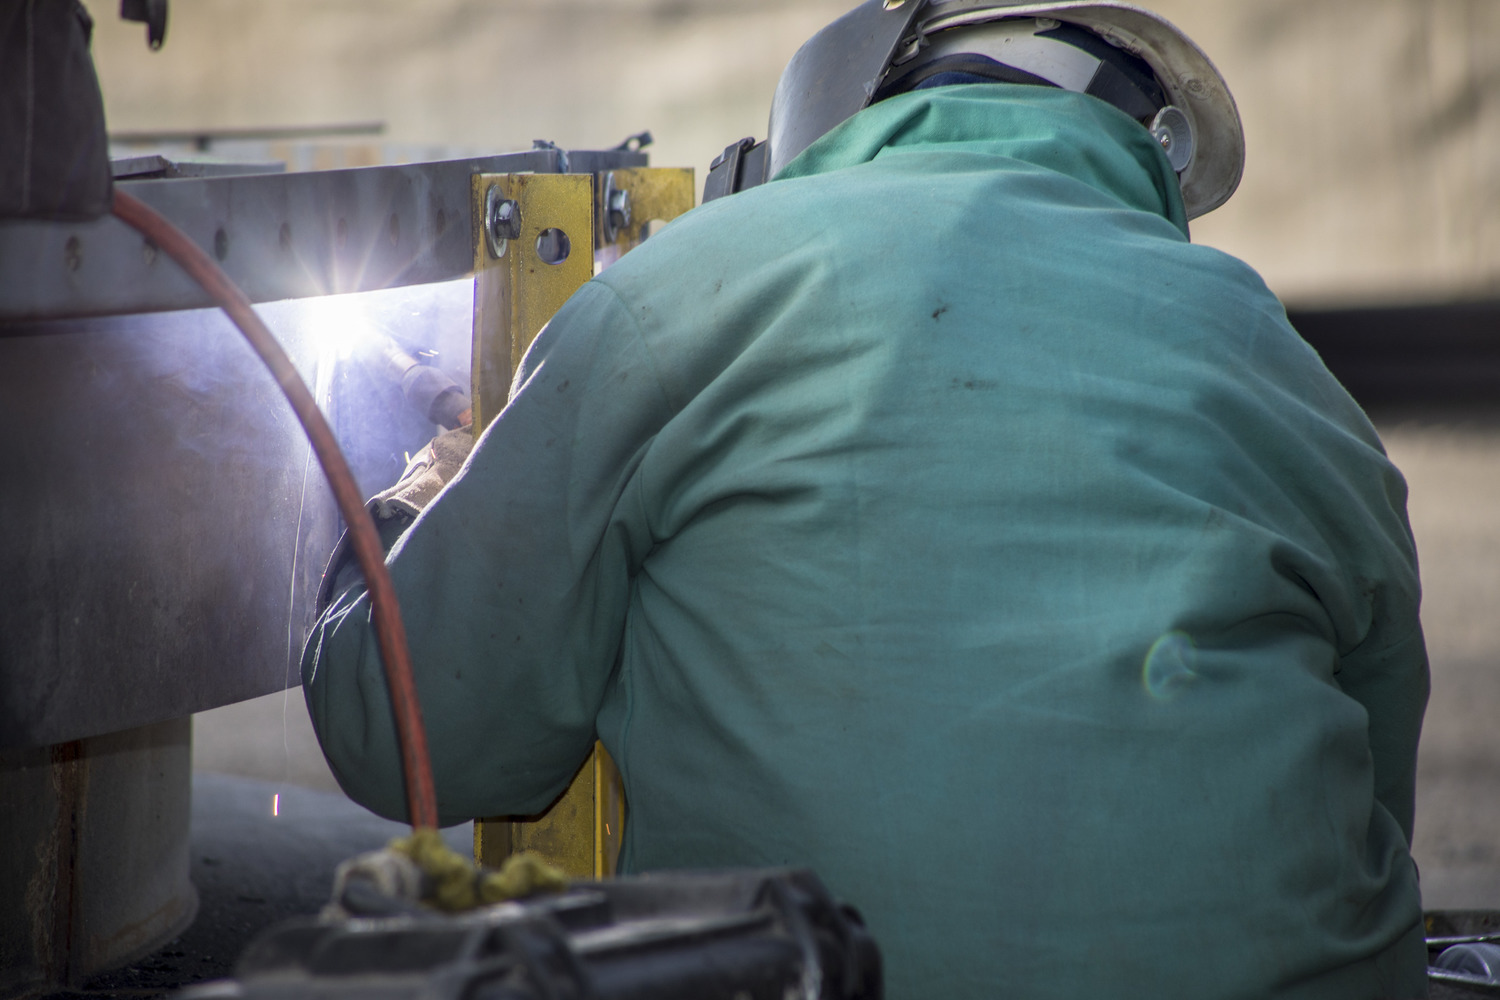 Sundt's Industrial Group self-performed much of the work on site with its own skilled craft workforce. Specialized trades included precision millwrighting, boiler-making, structural ironworking, piping, concrete and electrical.